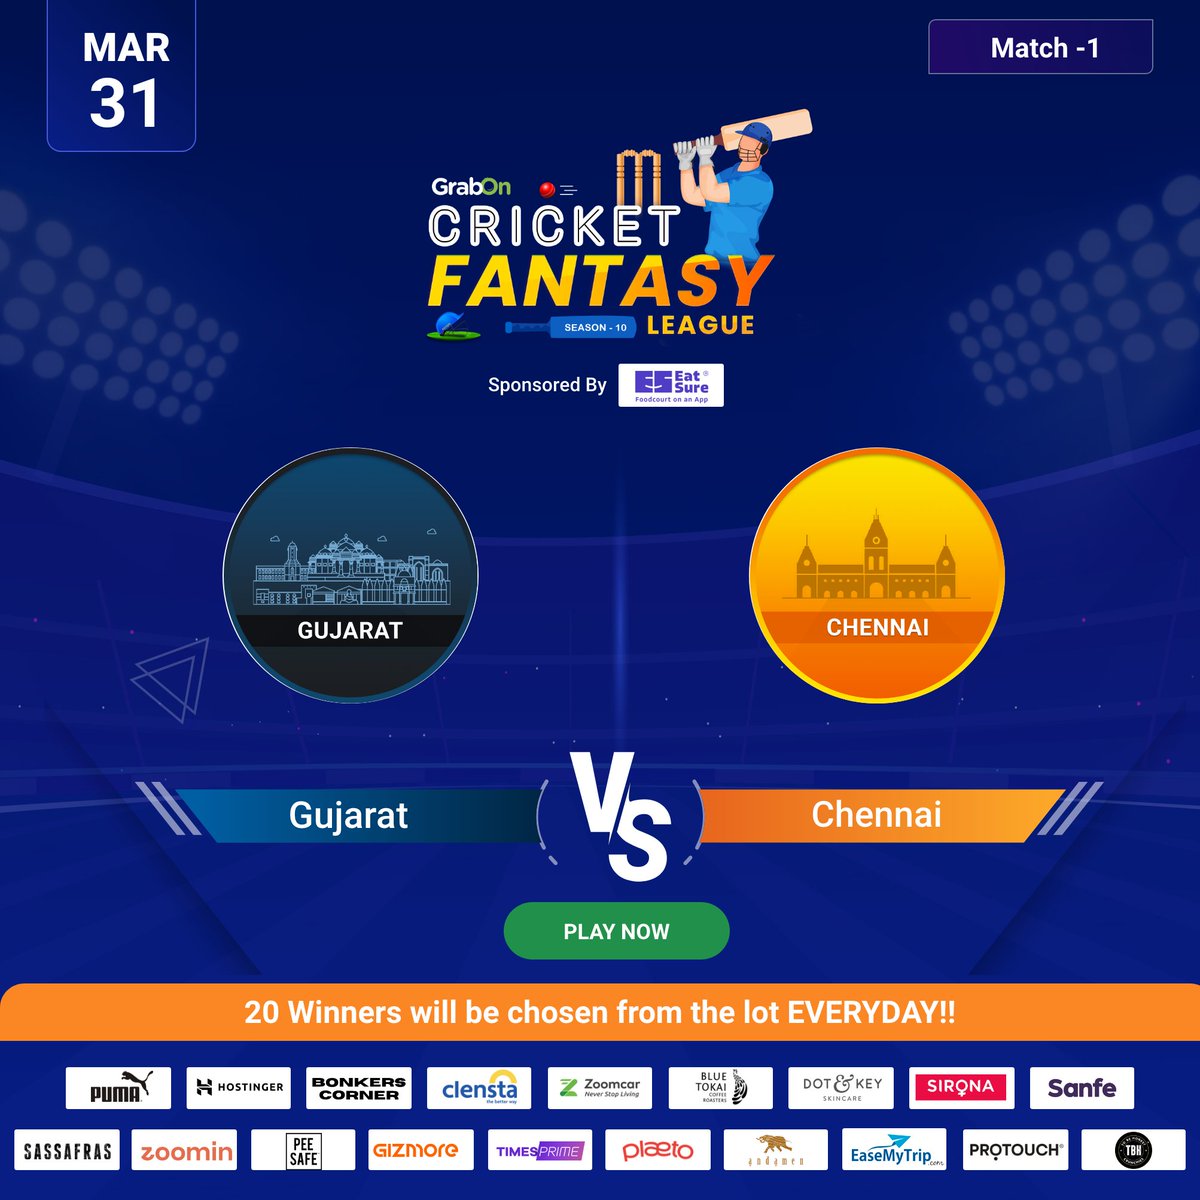 The first match of the IPL Season is here! Predict and Win Rewards. Submit your predictions via Link bit.ly/40e18D7 Note: Submissions are only valid through campaign page. #GrabOnCFL #Gujarat #Chennai #predictthewin #predictions #cricket #IPL2023 #IPL #cricketlovers